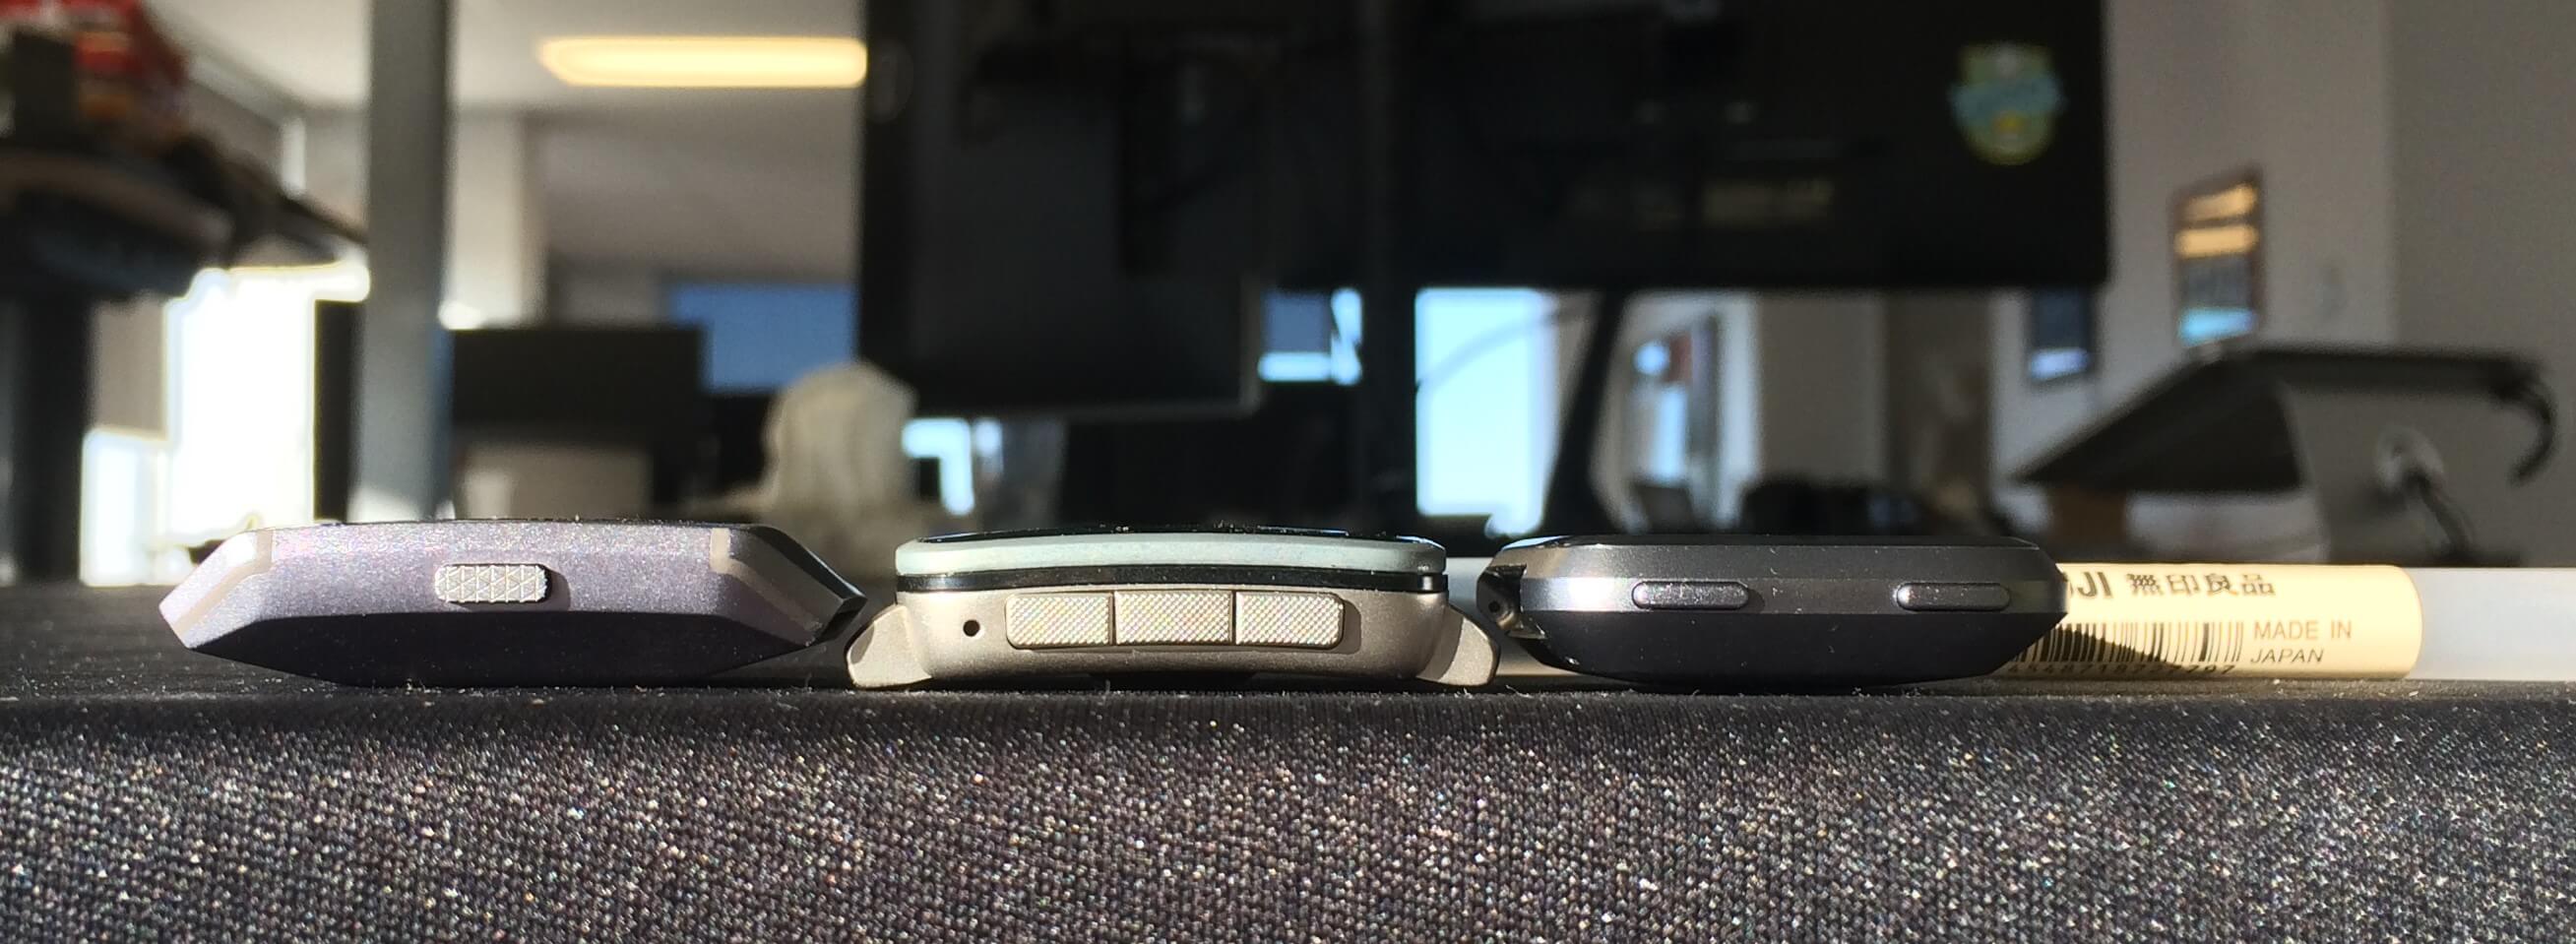 Fitbit Versa thickness comparison with Fitbit Ionic and Pebble Time 2